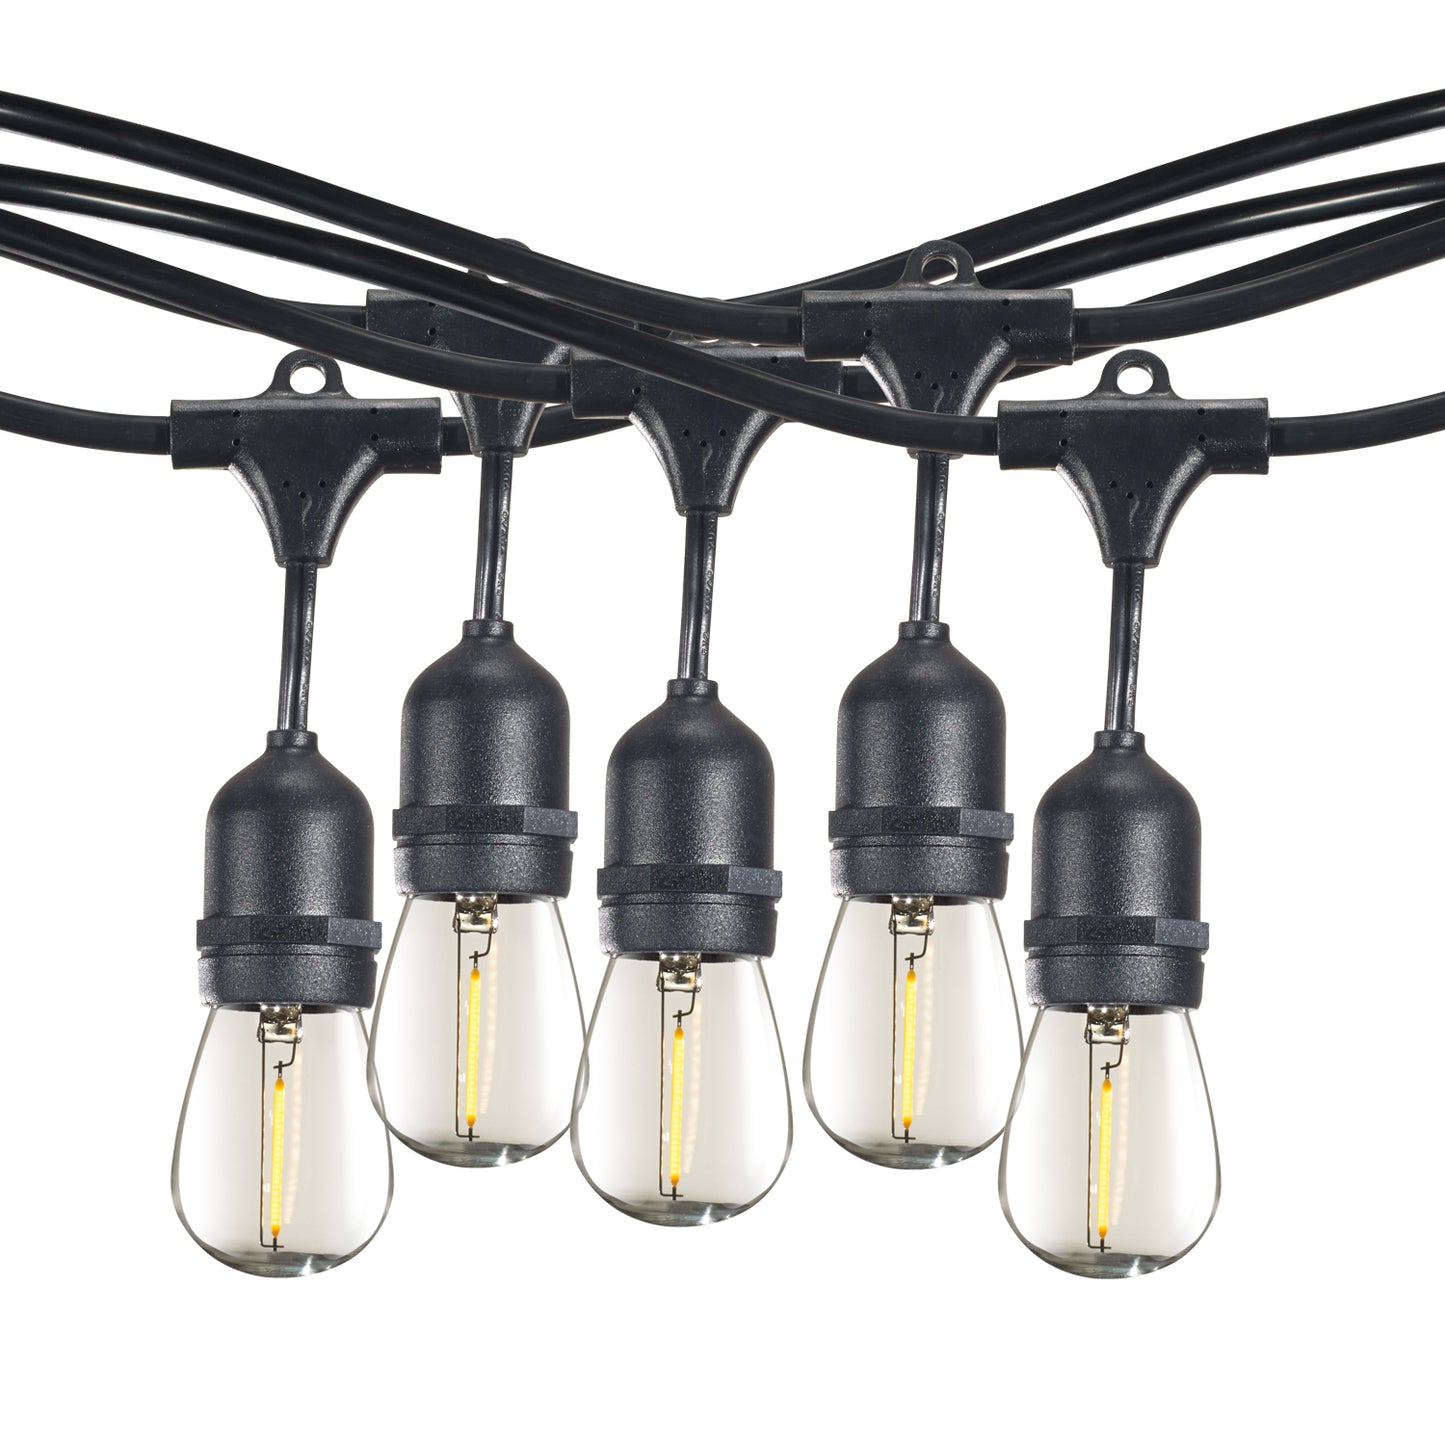 Bulbrite 30-foot String Light Kit with Clear Shatter Resistant Vintage Style S14 LED Light Bulbs